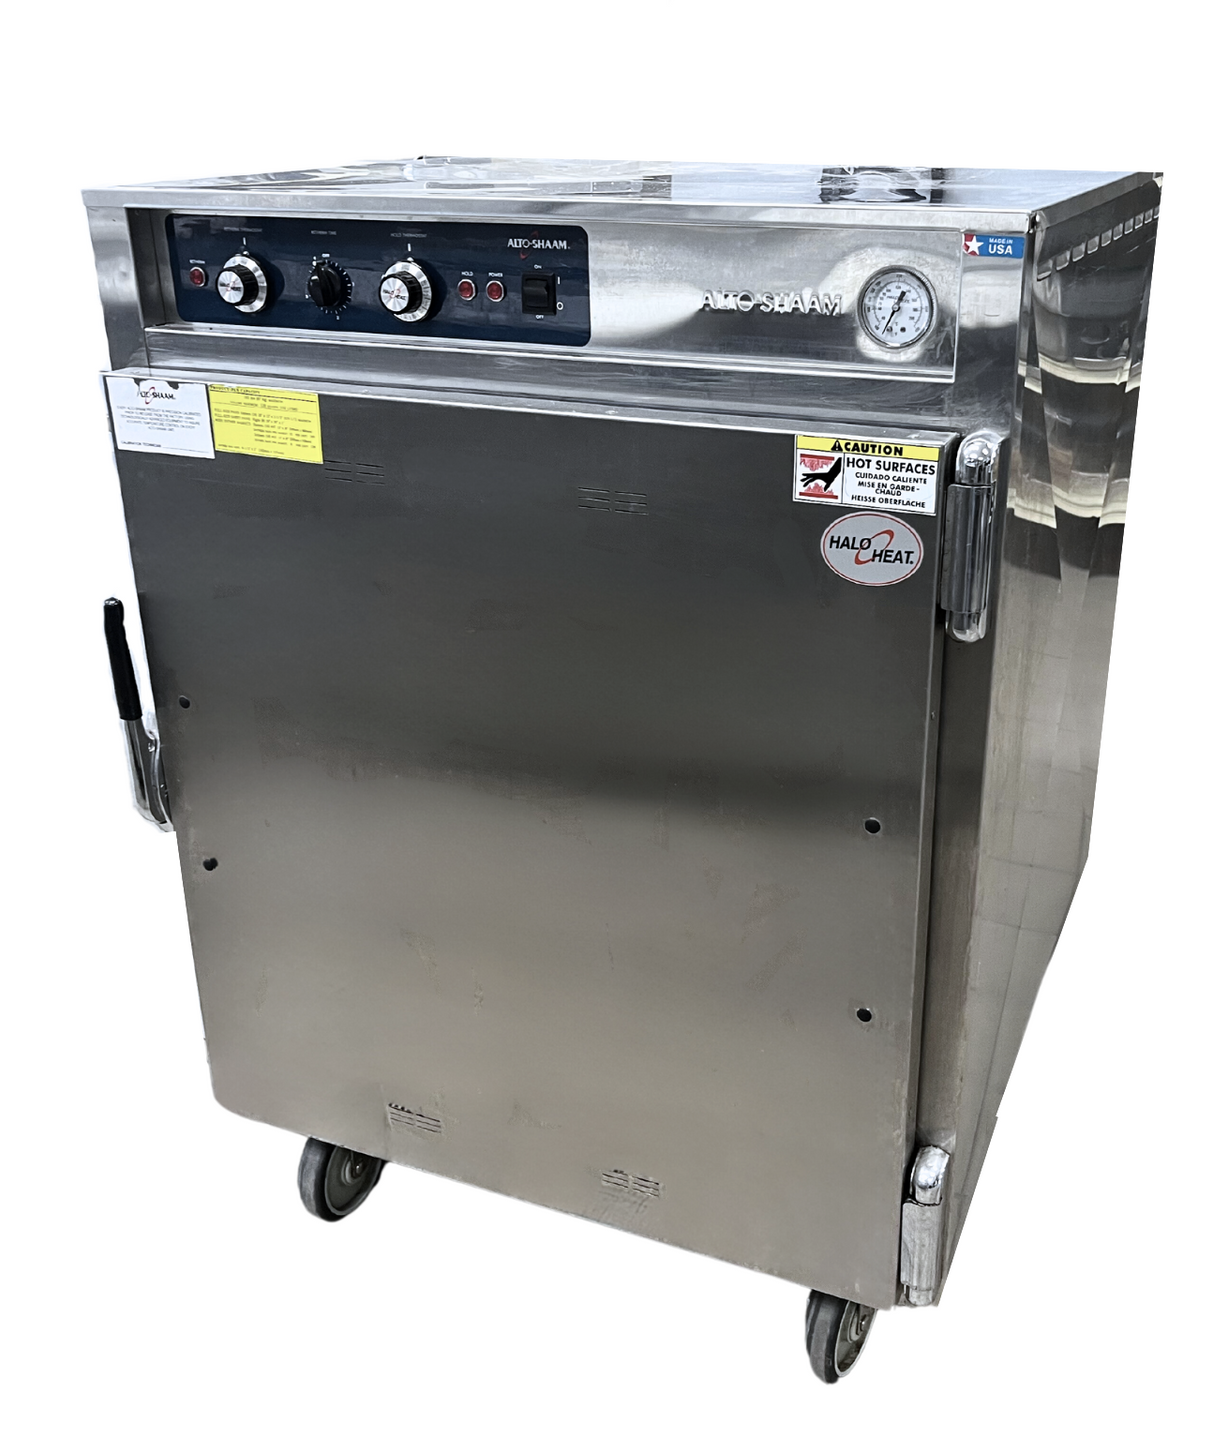 Model: 2800/S-RTM Alto-Shaam Retherm & Holding Oven